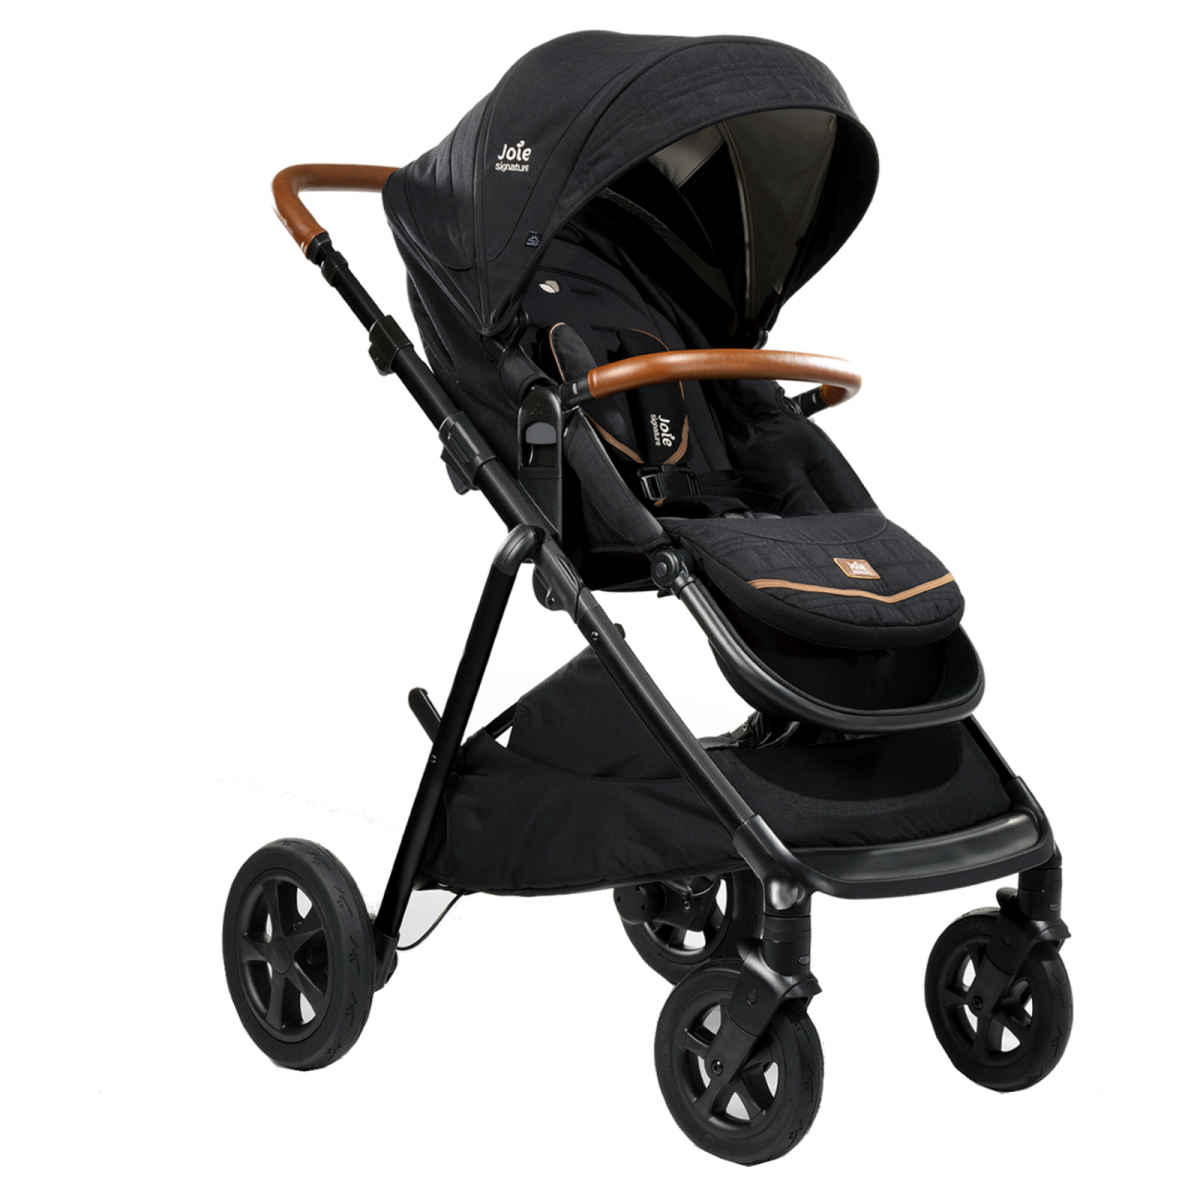 Pushchairs, Buggies & Strollers